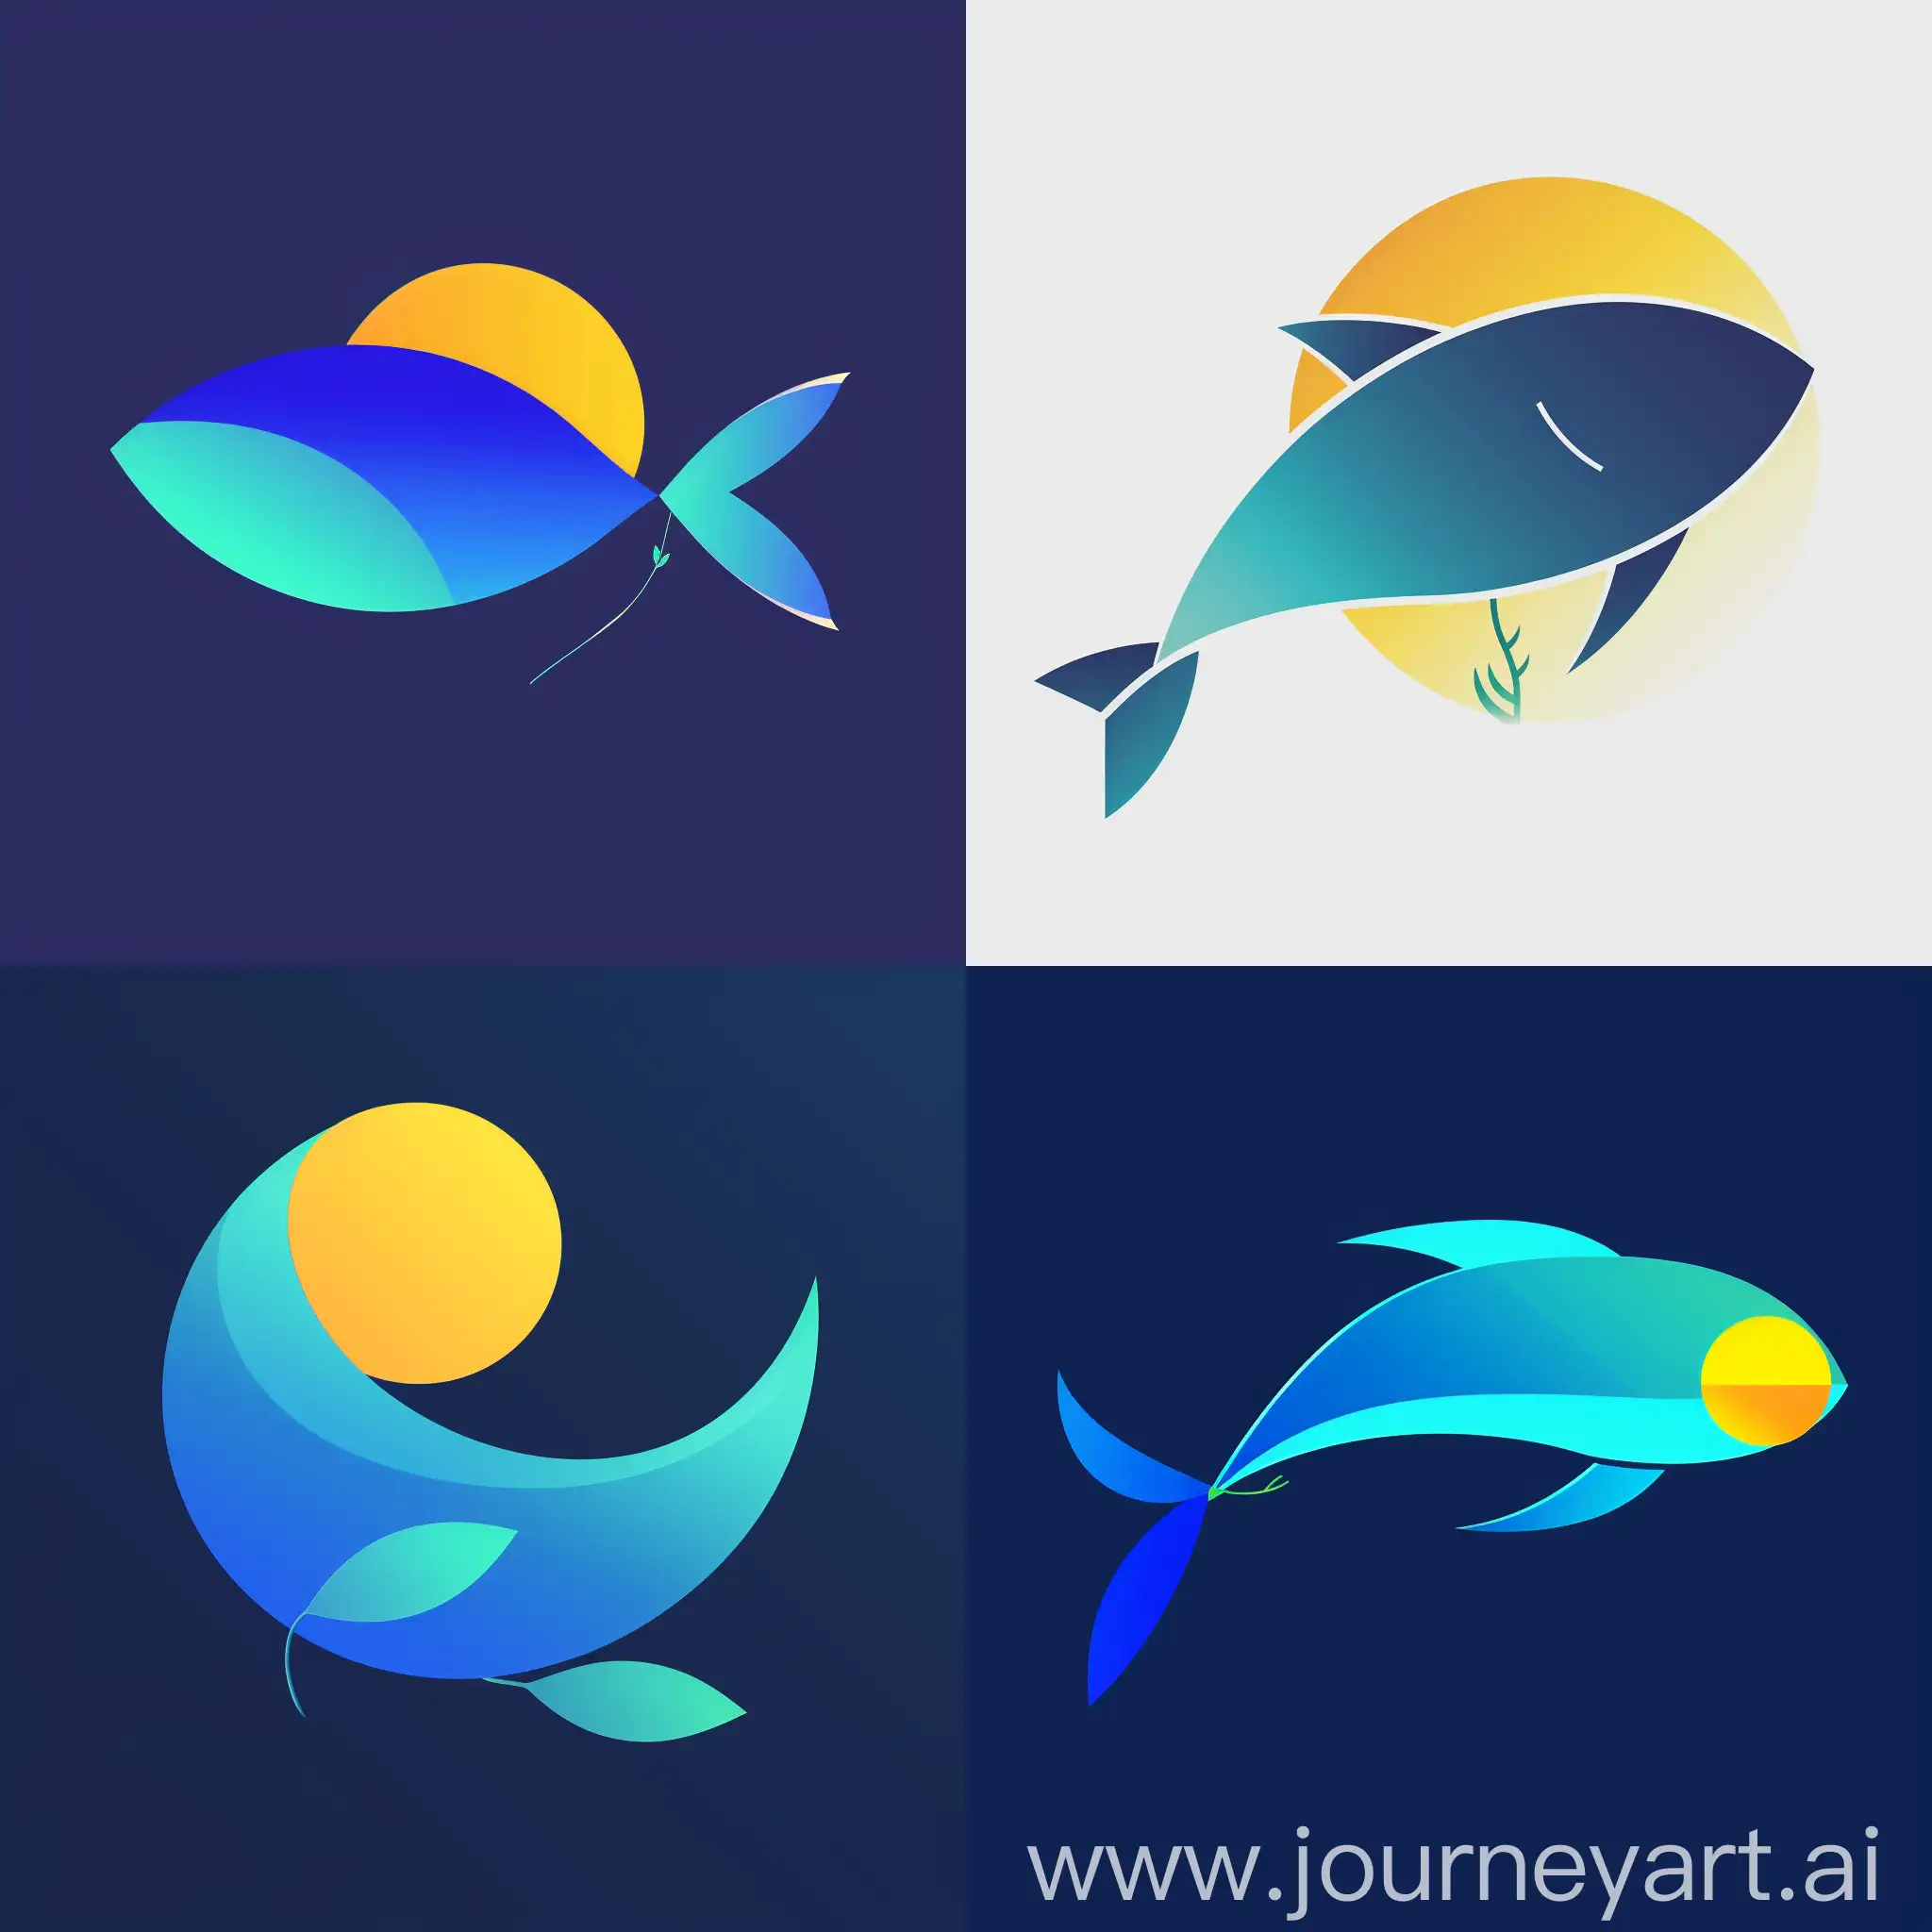 Minimal Logo Prompt: Sea, Fish, Sun & Fish Farming
Concept: Abstract Sun & Fish

Elements:

Shape: Create a single, continuous shape resembling a stylized fish.
Color: Use a gradient for the fish shape, transitioning from a deep blue at the "tail" to a lighter blue at the "head."
Sun: Integrate a small, bright yellow circle within the "head" of the fish to represent the sun. This circle can be partially obscured by the fish shape for a more subtle effect.
Optional Elements:

Growth: To subtly represent "پرورش" (fish farming/cultivation), you can add a thin green line or a small sprout shape near the "tail" of the fish.
Movement: Consider incorporating a very faint wave pattern within the blue gradient as a background element, symbolizing the ocean environment.